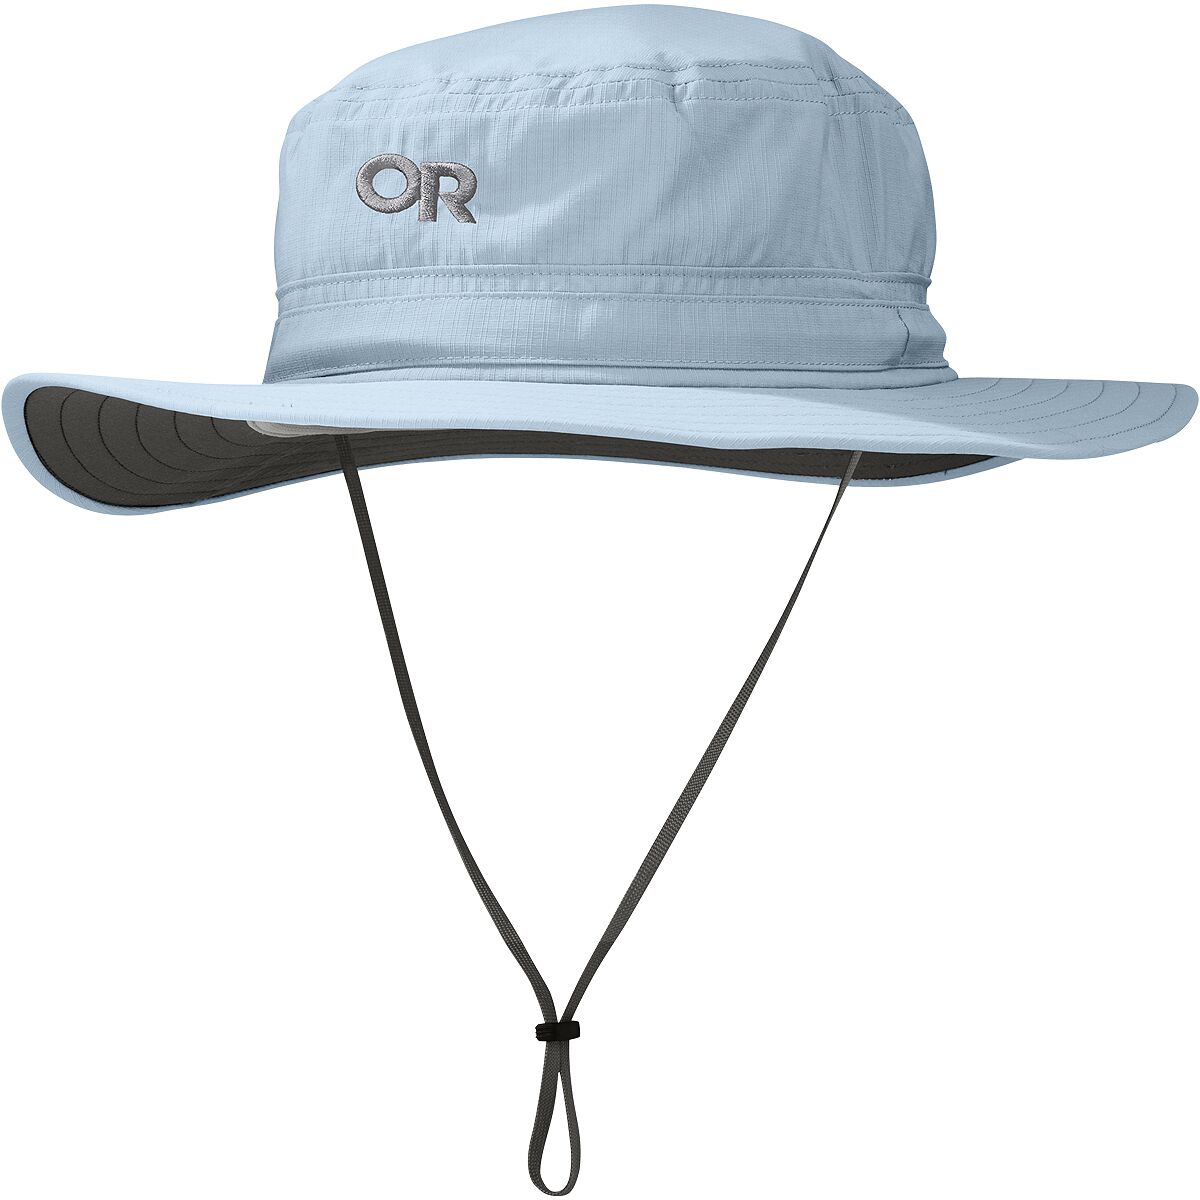 Outdoor Research Men's Hats | Backcountry.com